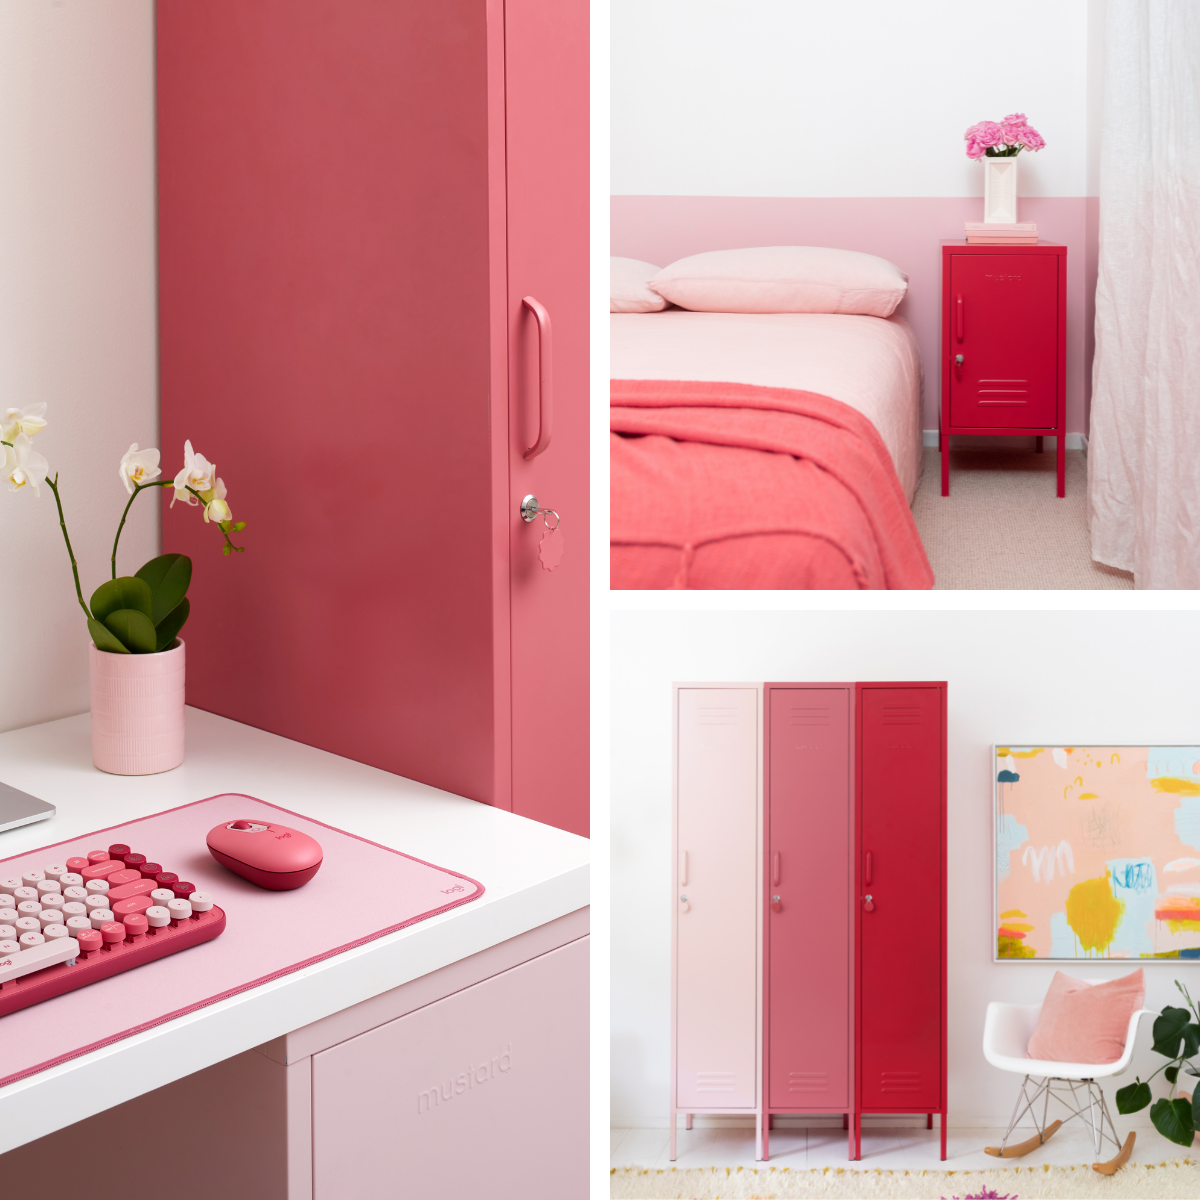 Perfectly pink images of Blush, Poppy and Berry lockers.